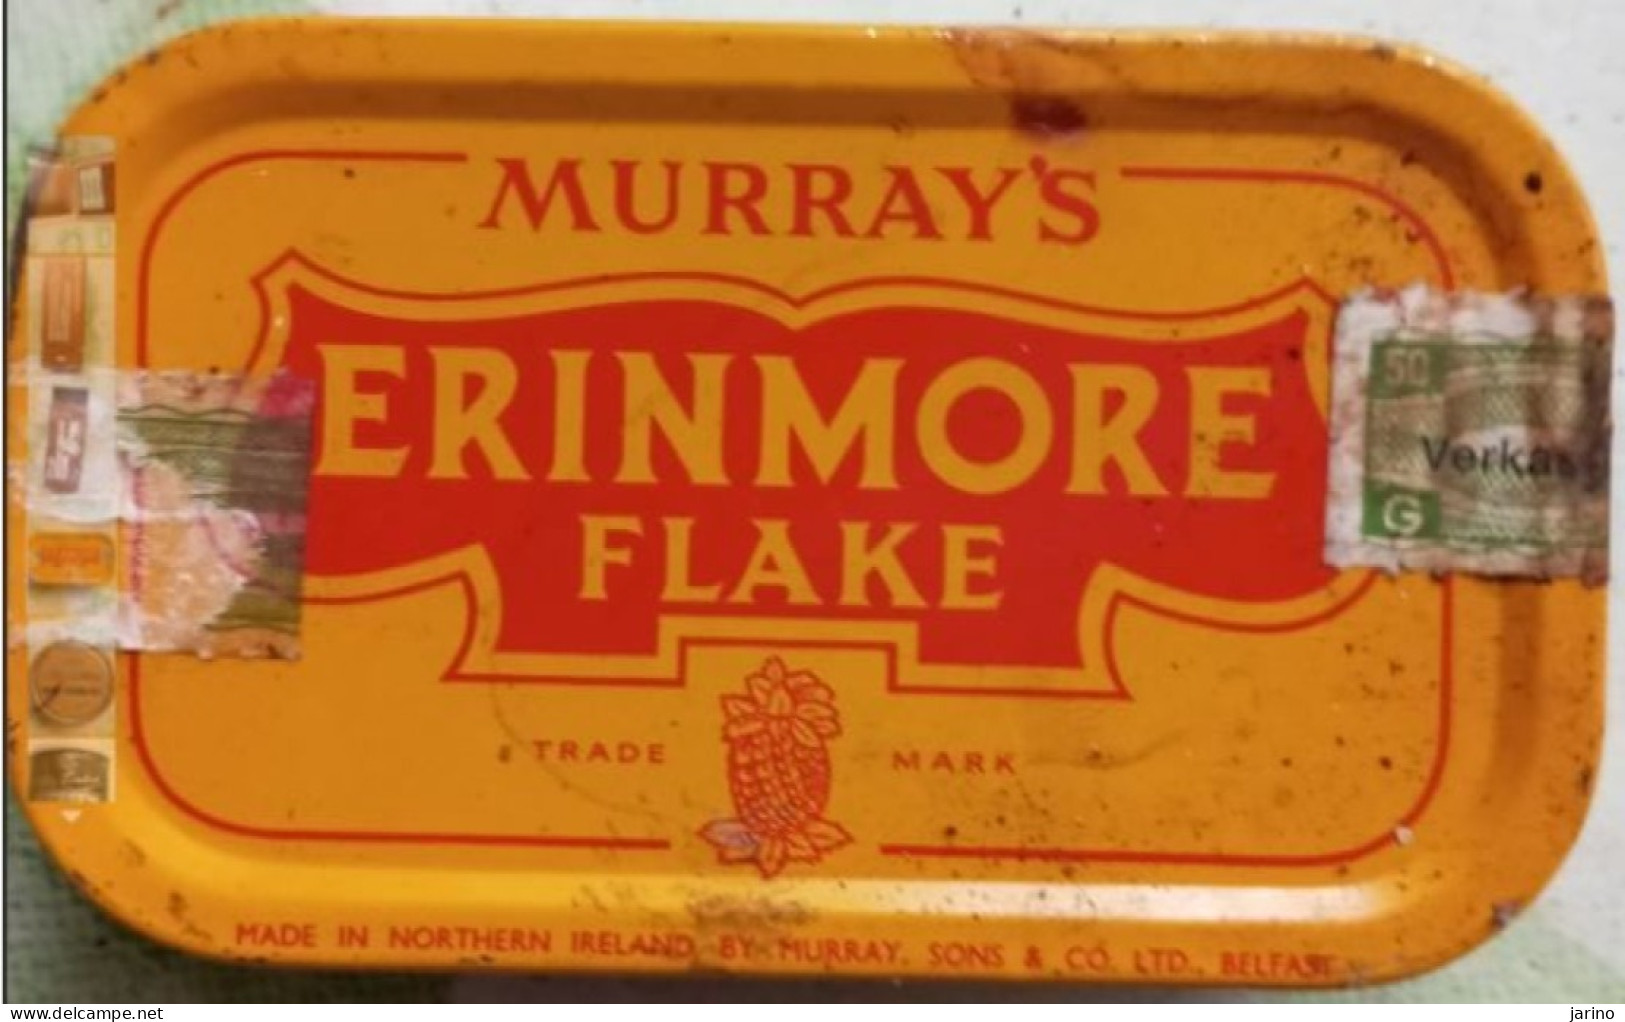 Empty Metal Tobacco Box MURRAY'S ERINMORE Flake, Made In Northern Ireland, 9,5 X 6 X 2,5 Cm - Boites à Tabac Vides